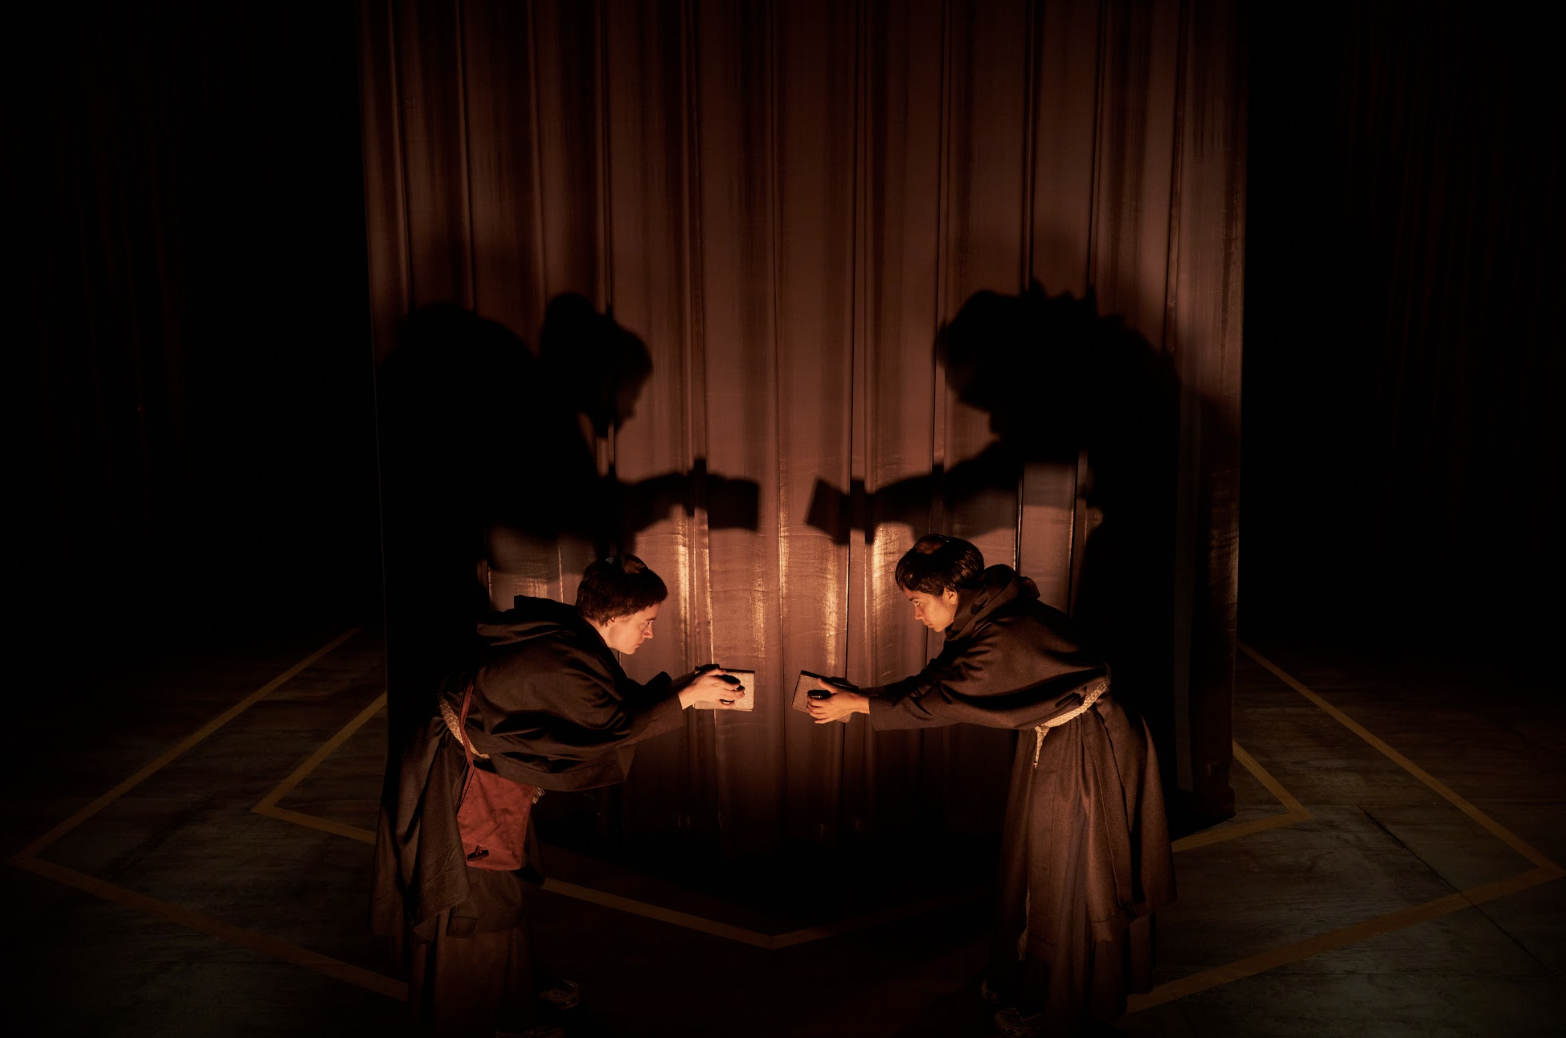 Two actors dressed in hermit's clothing bowing to each other with books in their hands 